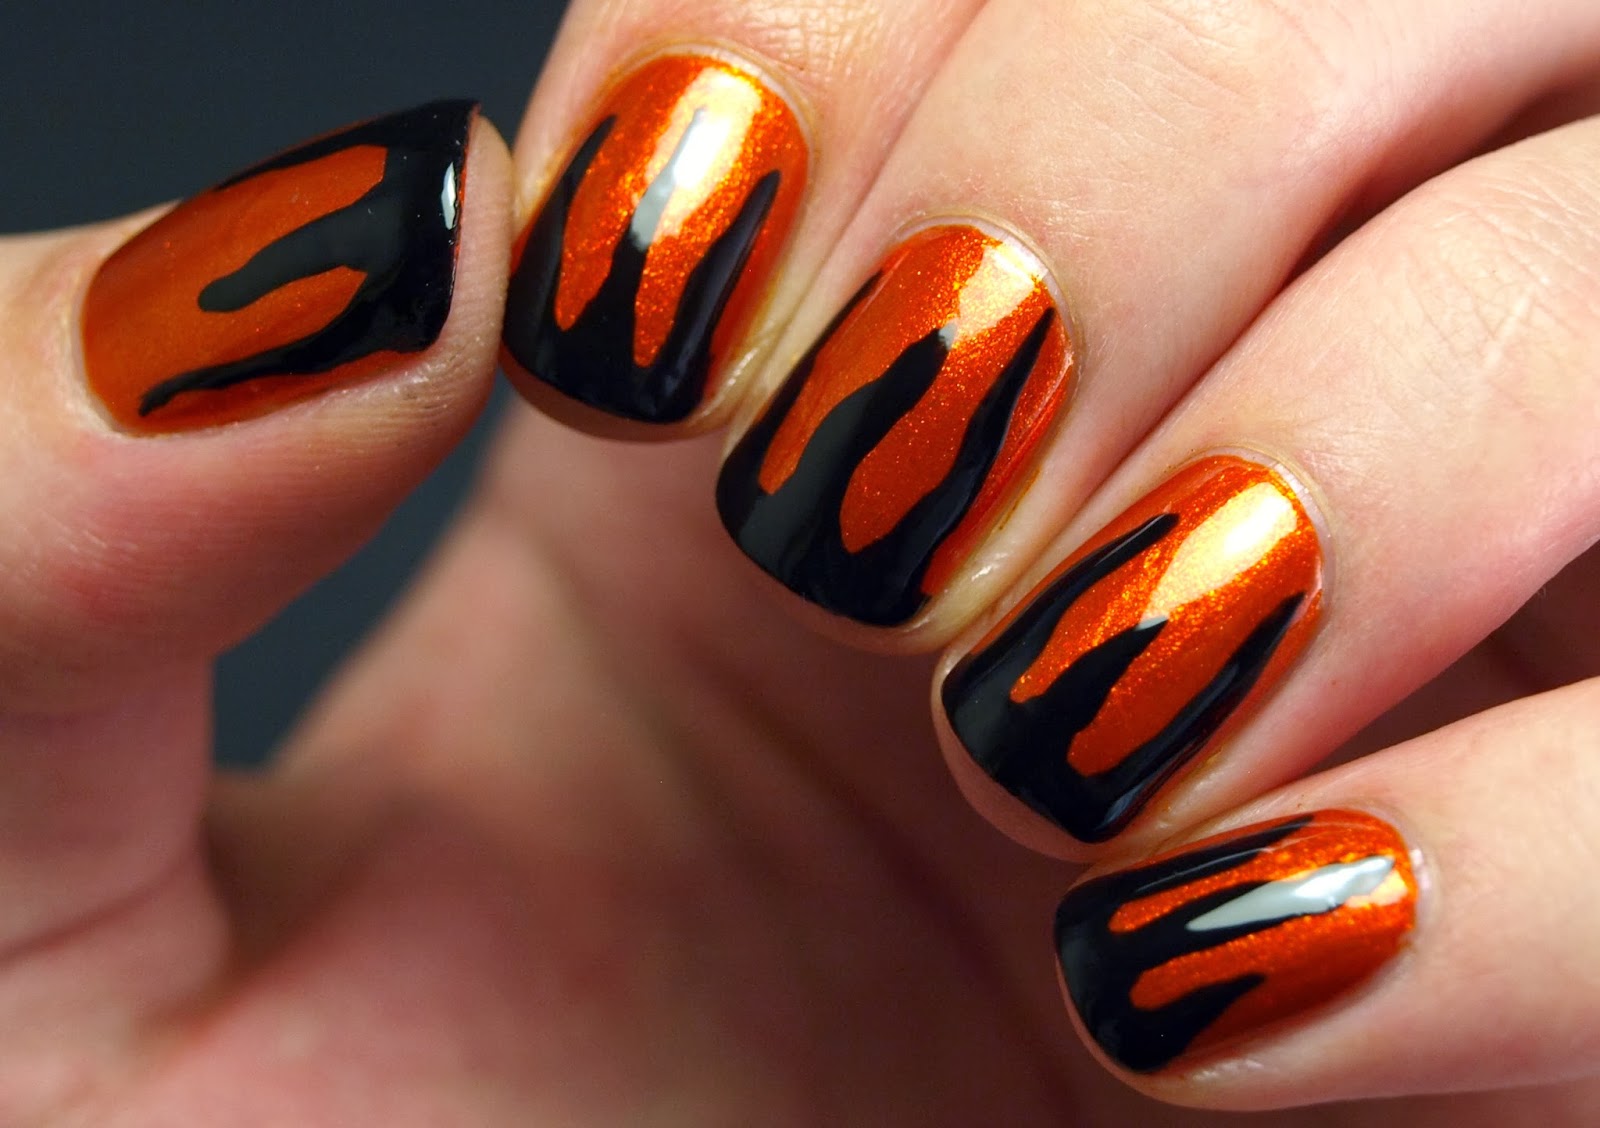 Nail Polish Society: It's About Time! Fiery Halloween Nails